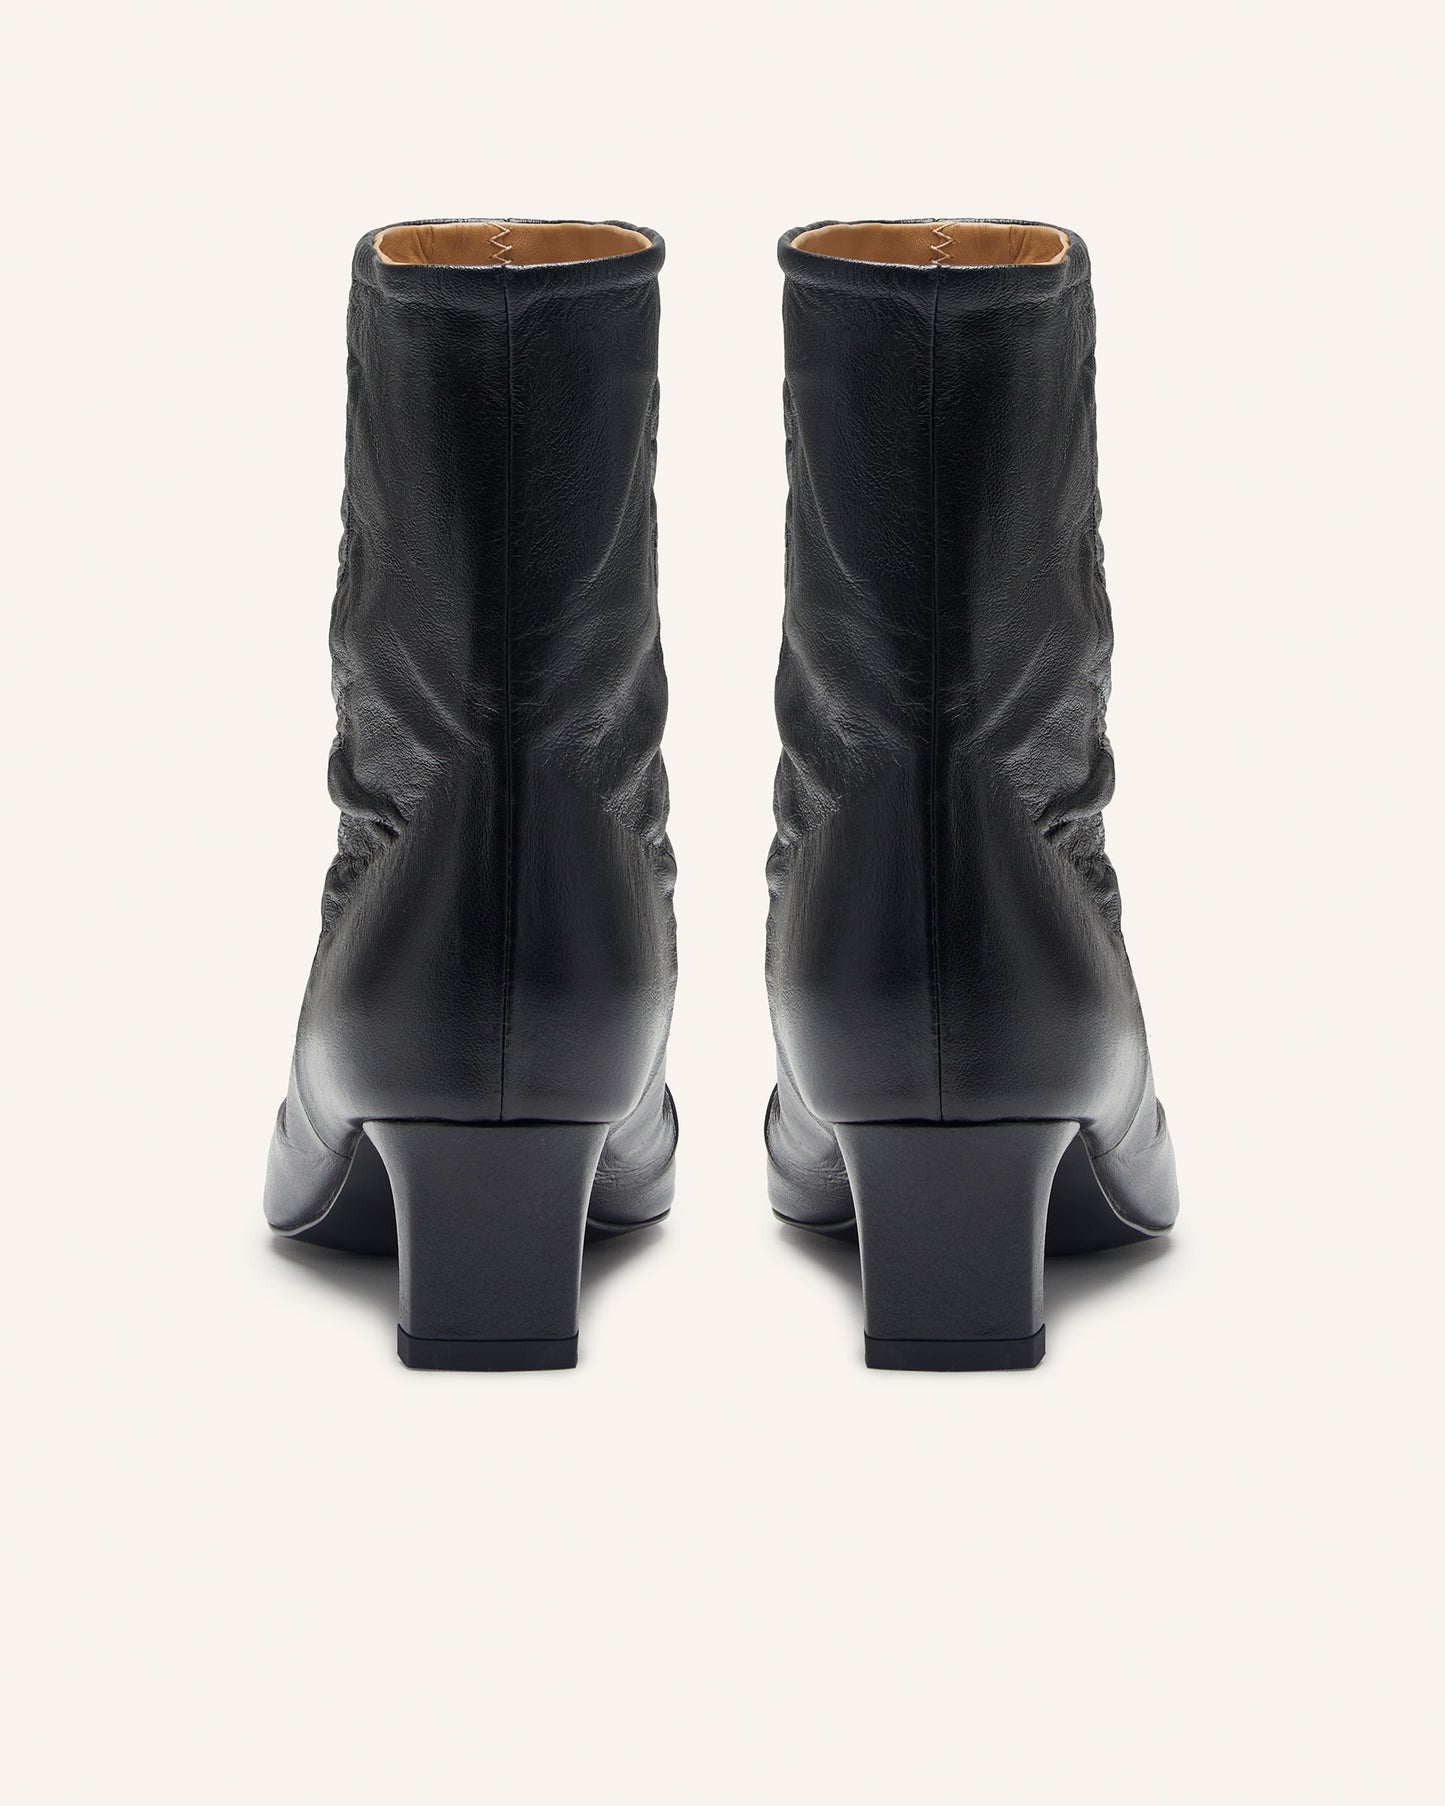 Rushy Ankle Boots